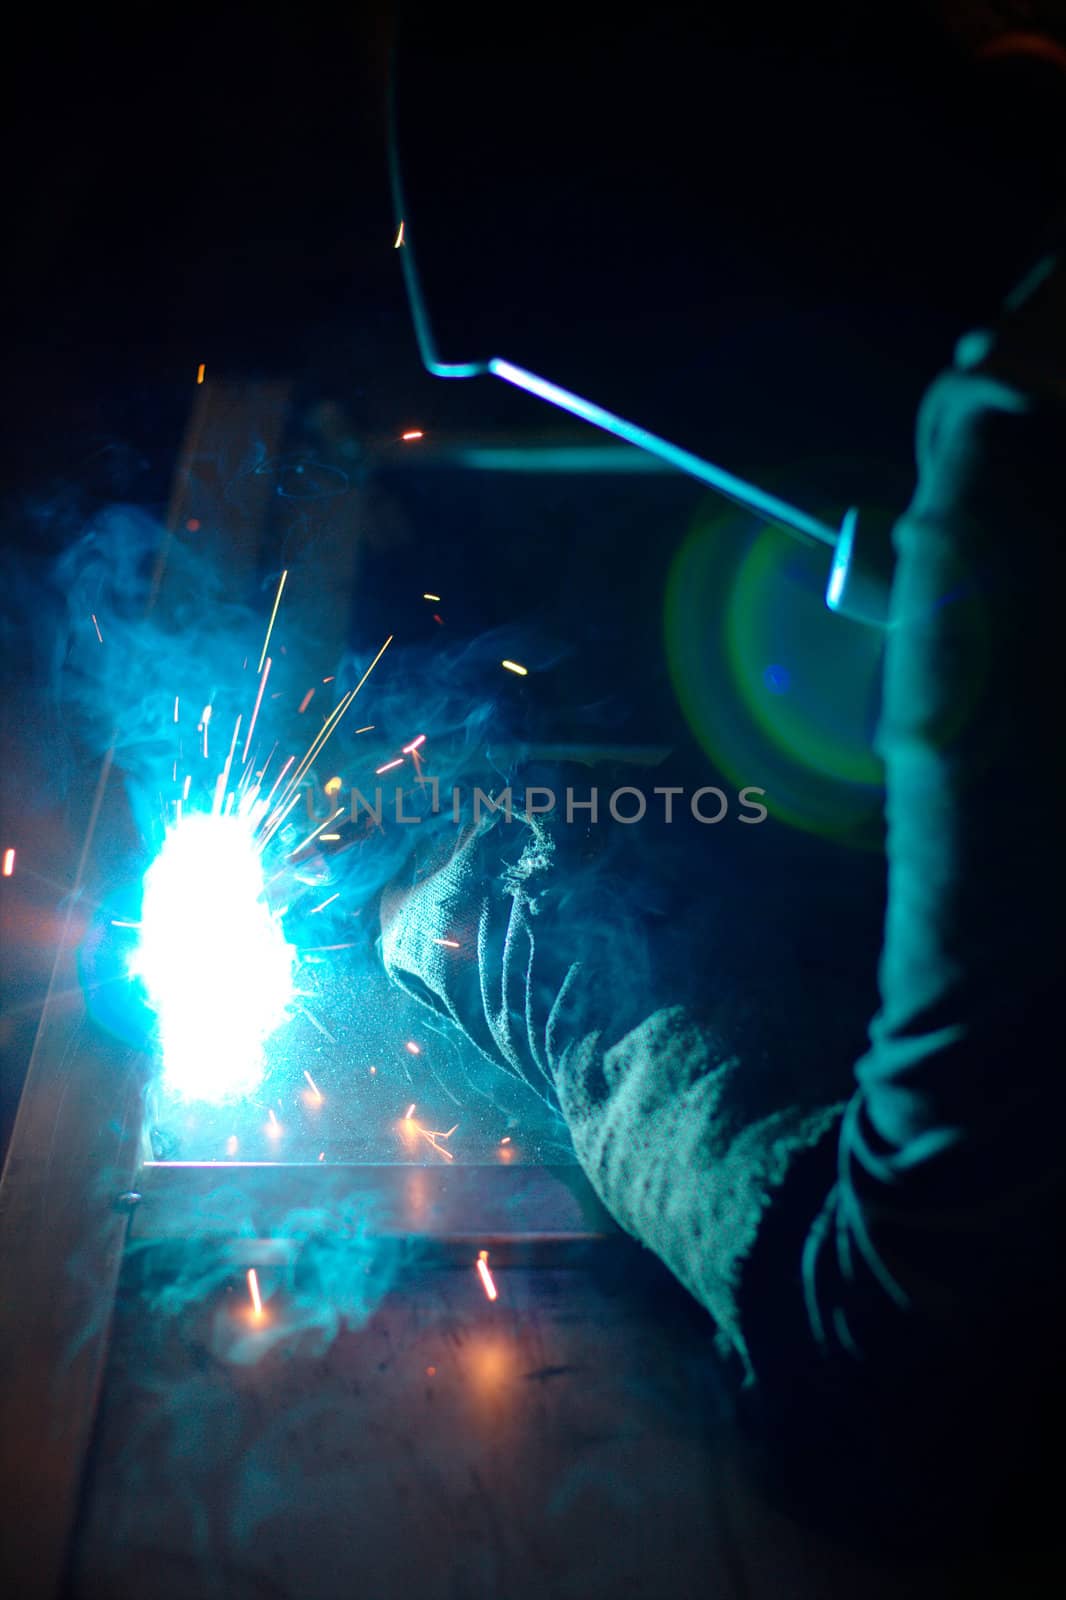 Close-up photo of a welder at work with sparks flying around